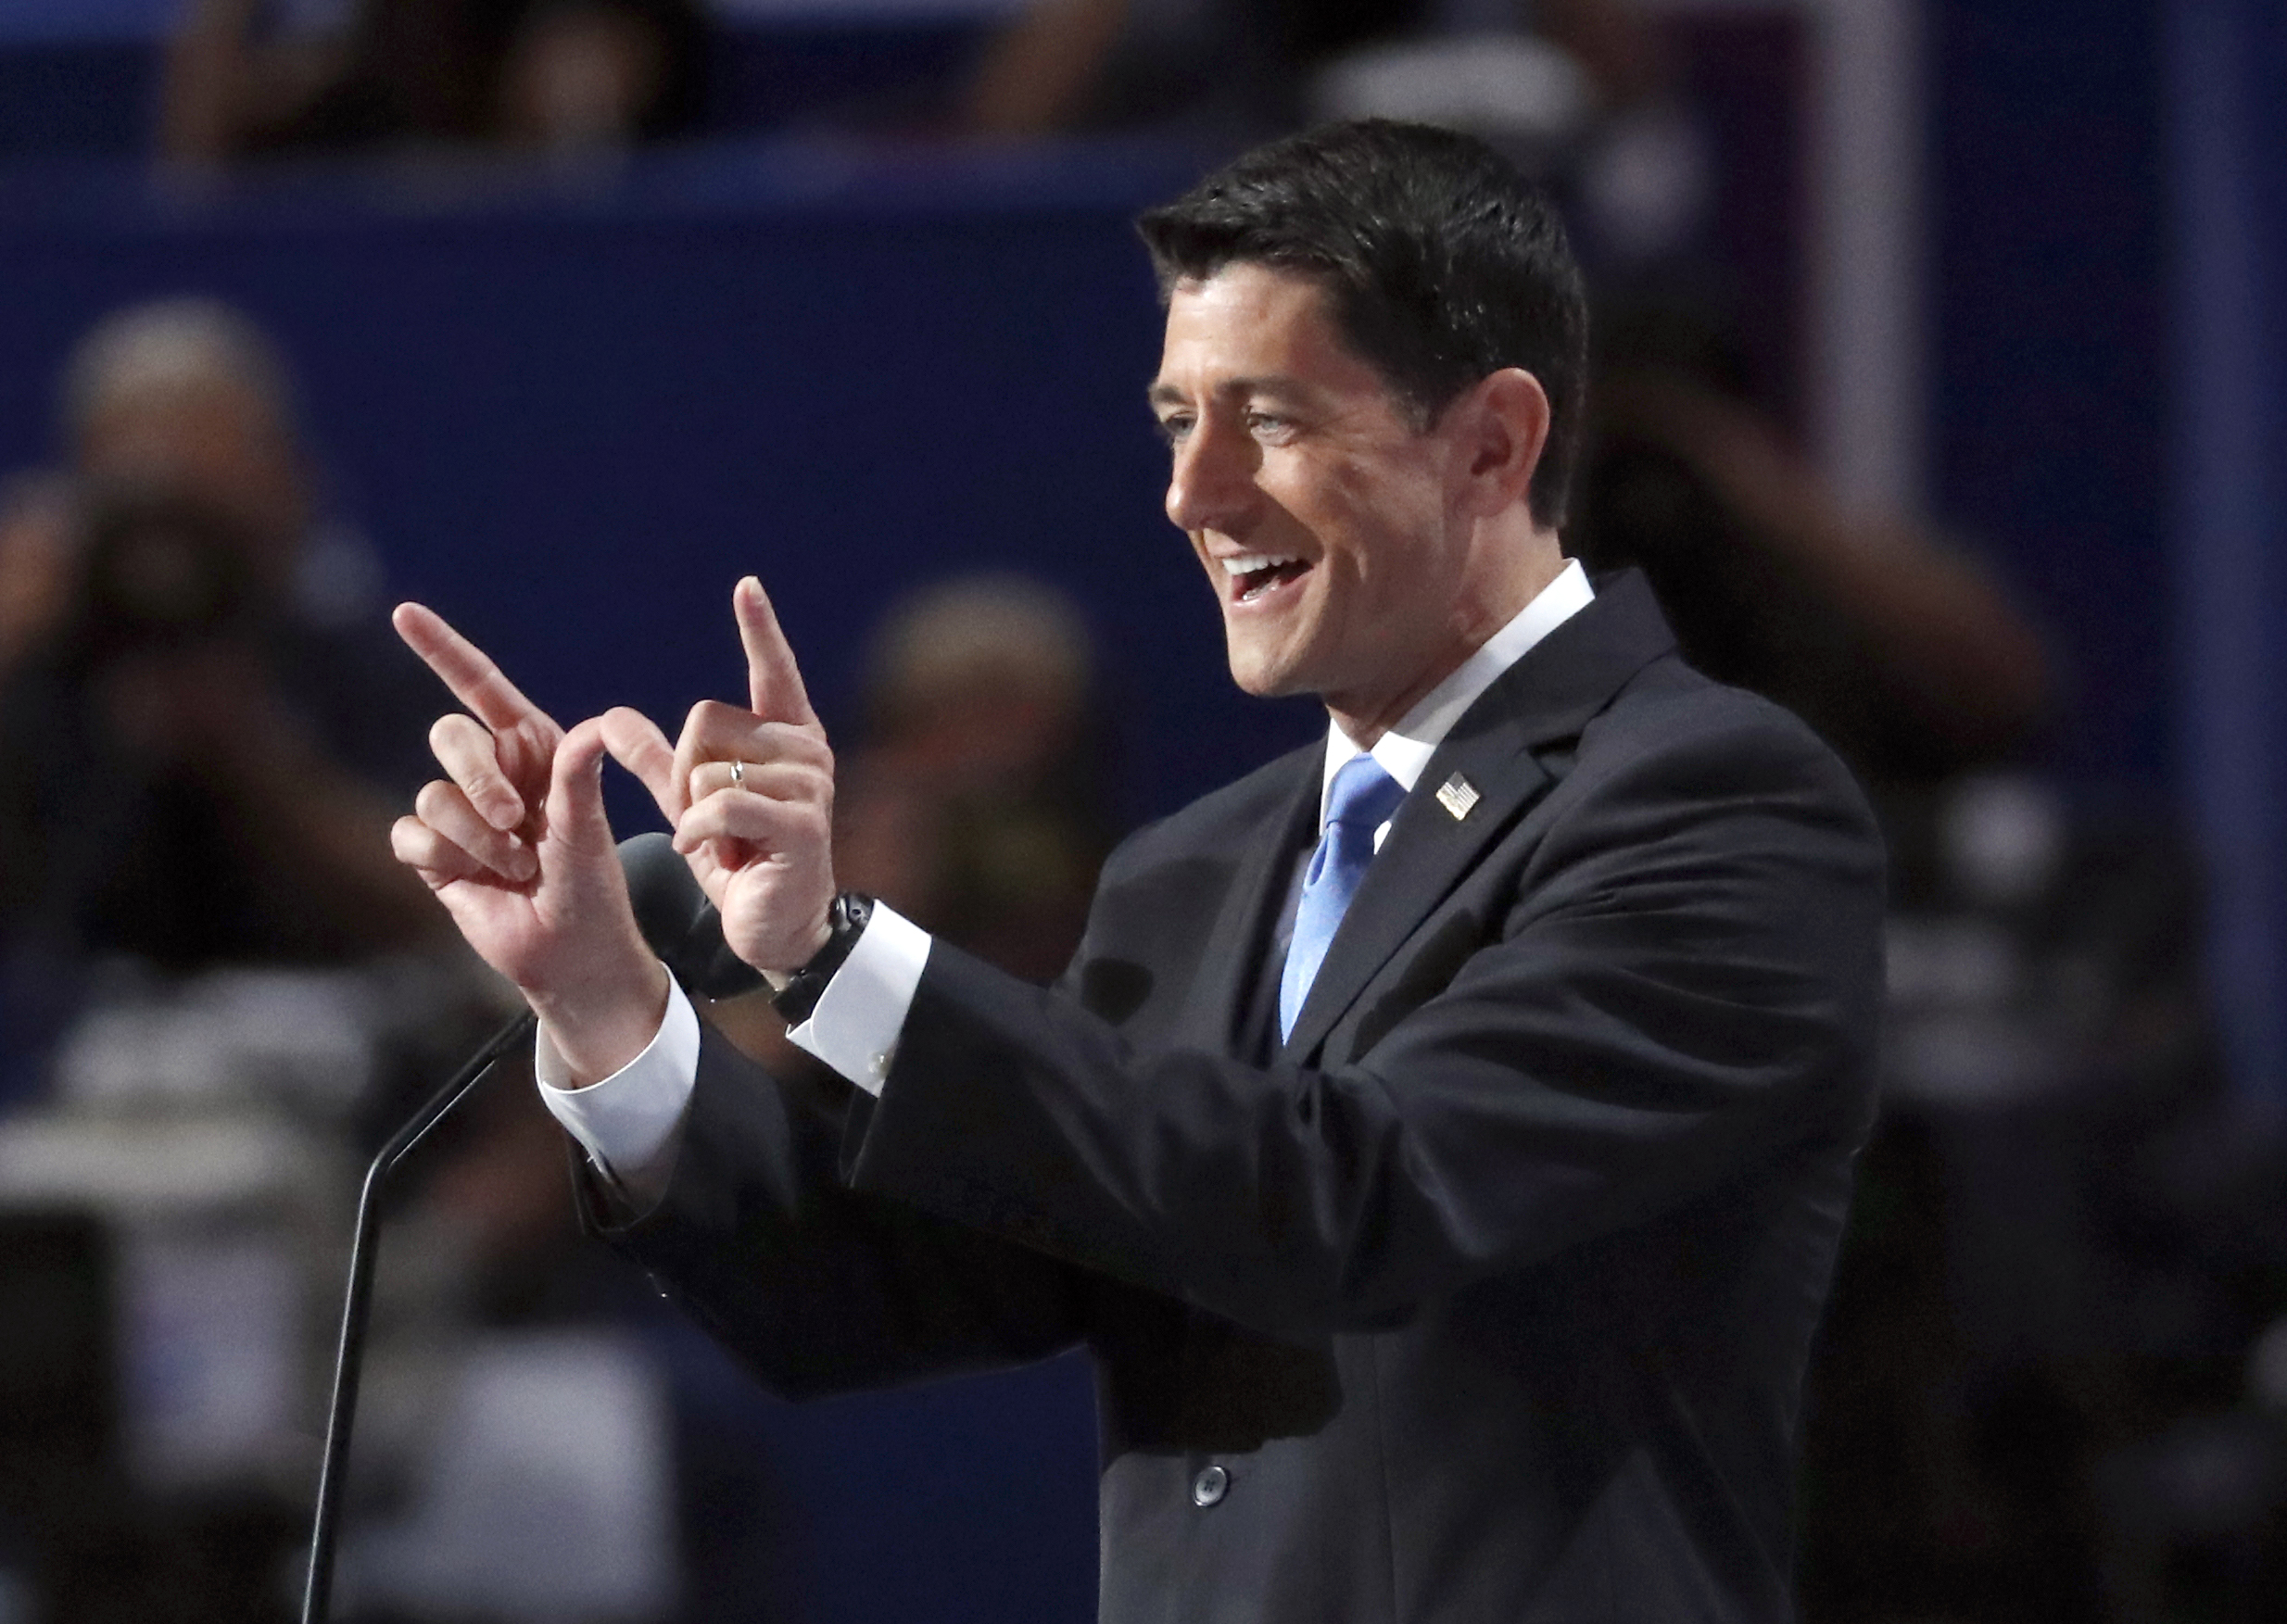 PHOTO: Speaker Paul Ryan addresses the delegates during the second day of the Republican National Convention in Cleveland, July 19, 2016.